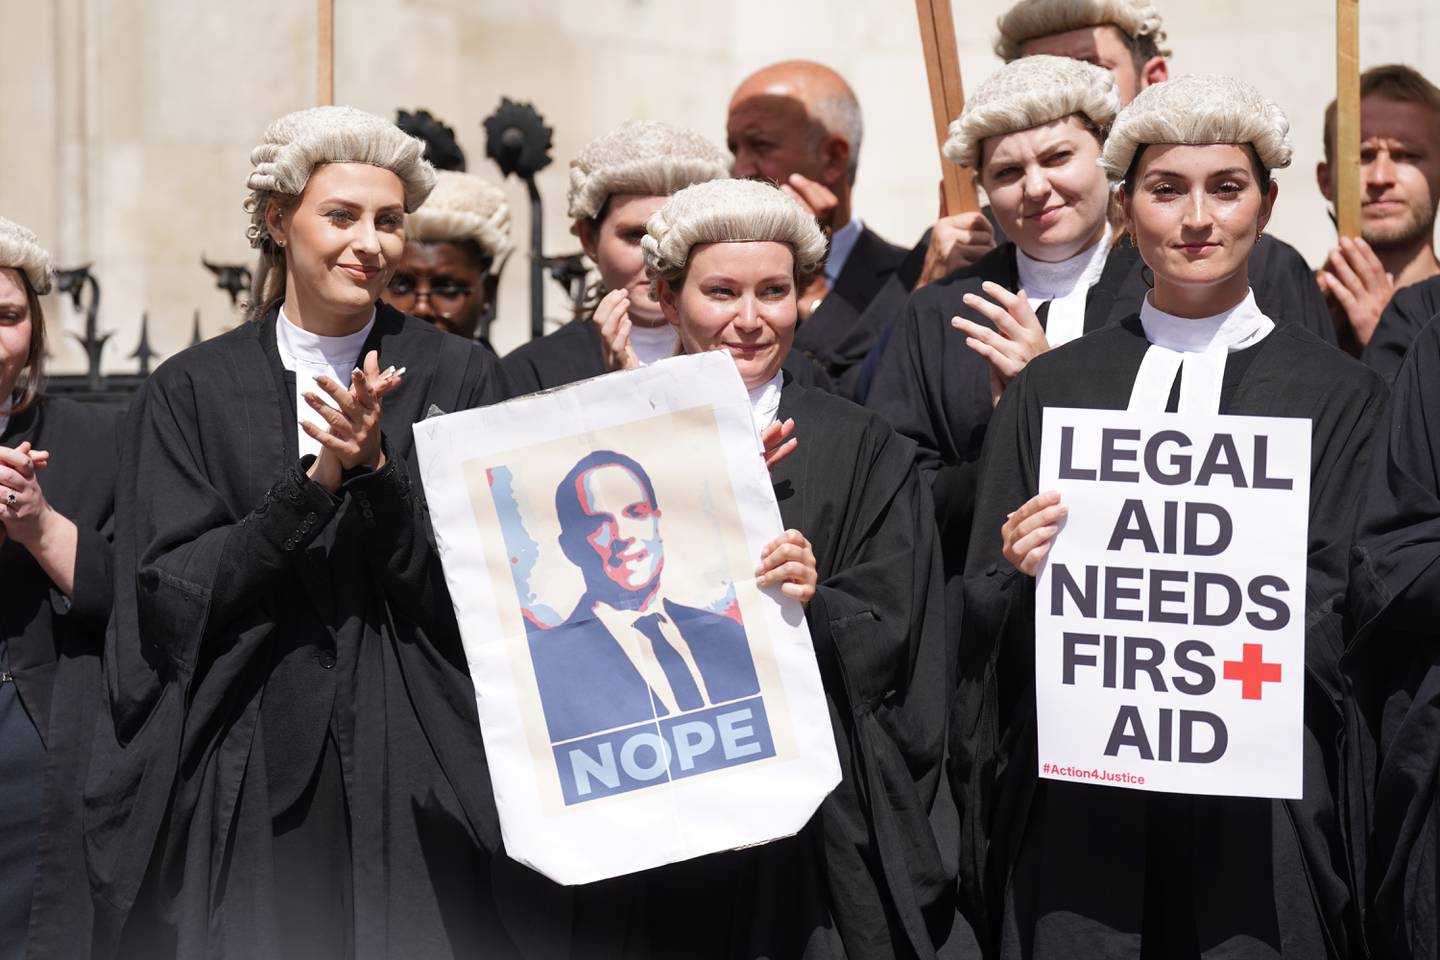 Criminal defence barristers gather outside the Royal Courts of Justice in London to support the ongoing Criminal Bar Association action over government set fees for legal aid advocacy work, on July 4. PA Wire